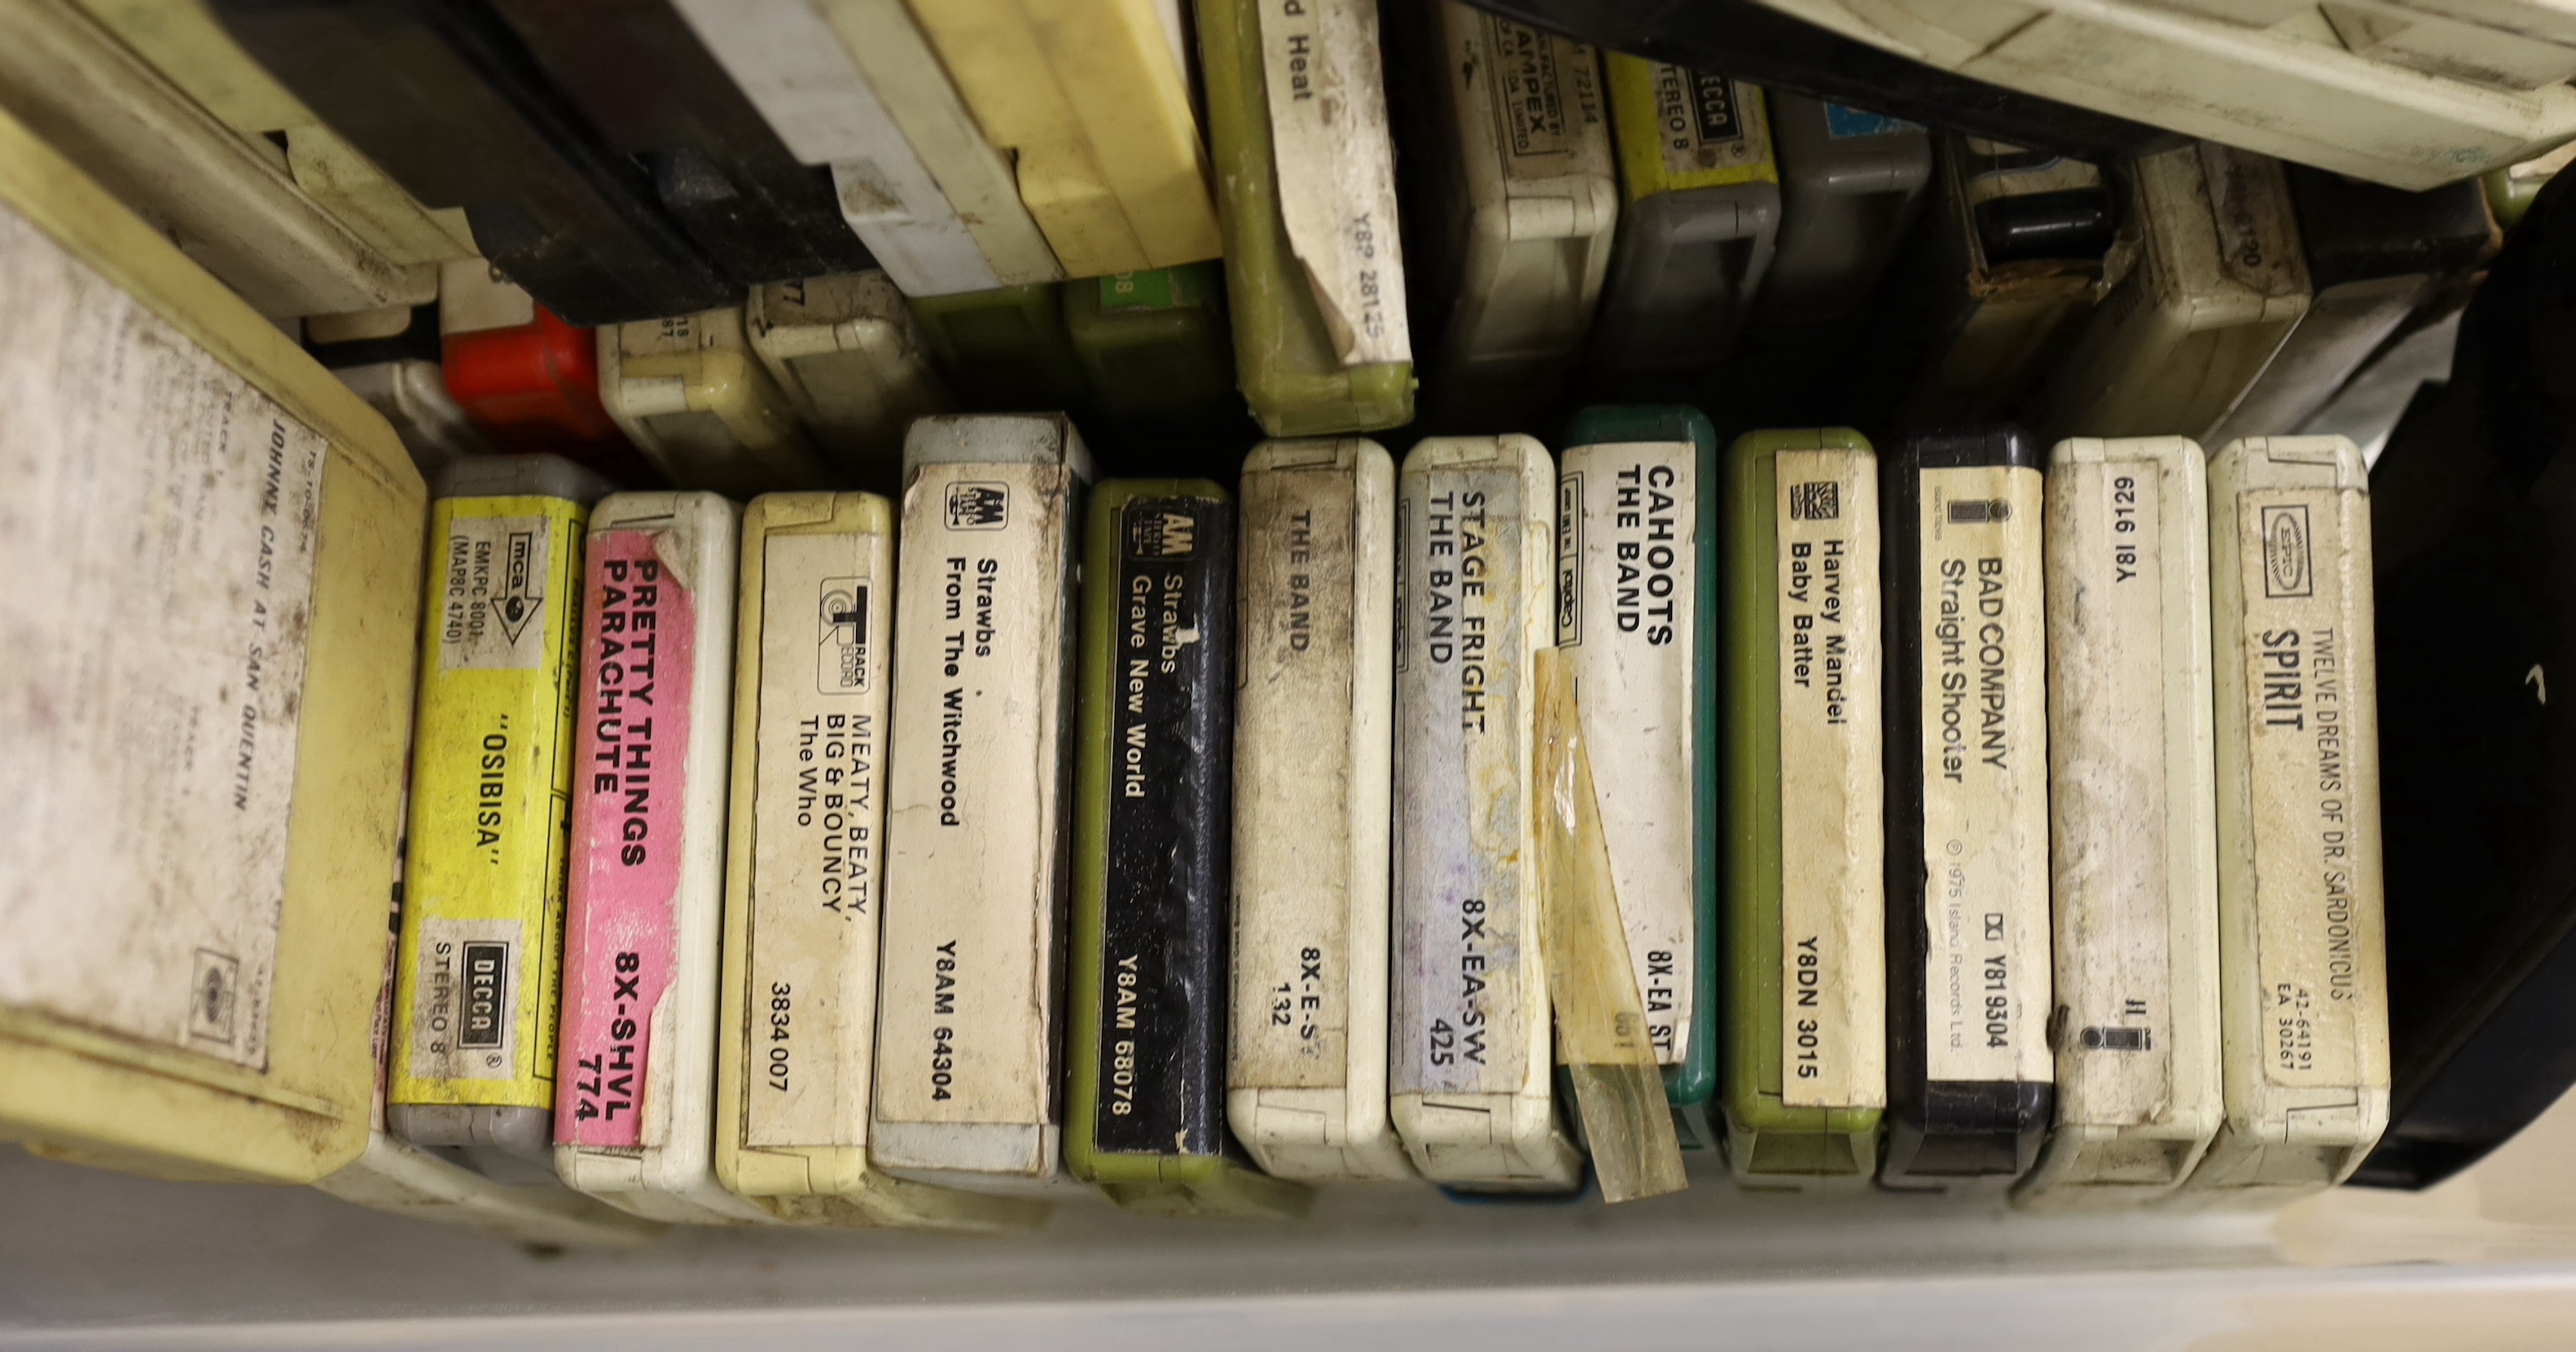 A collection of approximately fifty 8 track cassettes from the 1970's, including Fleetwood Mac, Santana, Jimi Hendrix, Chicago, The Beach Boys, Strawbs, Emerson, Lake & Palmer, Led Zeppelin, The Doors, etc.